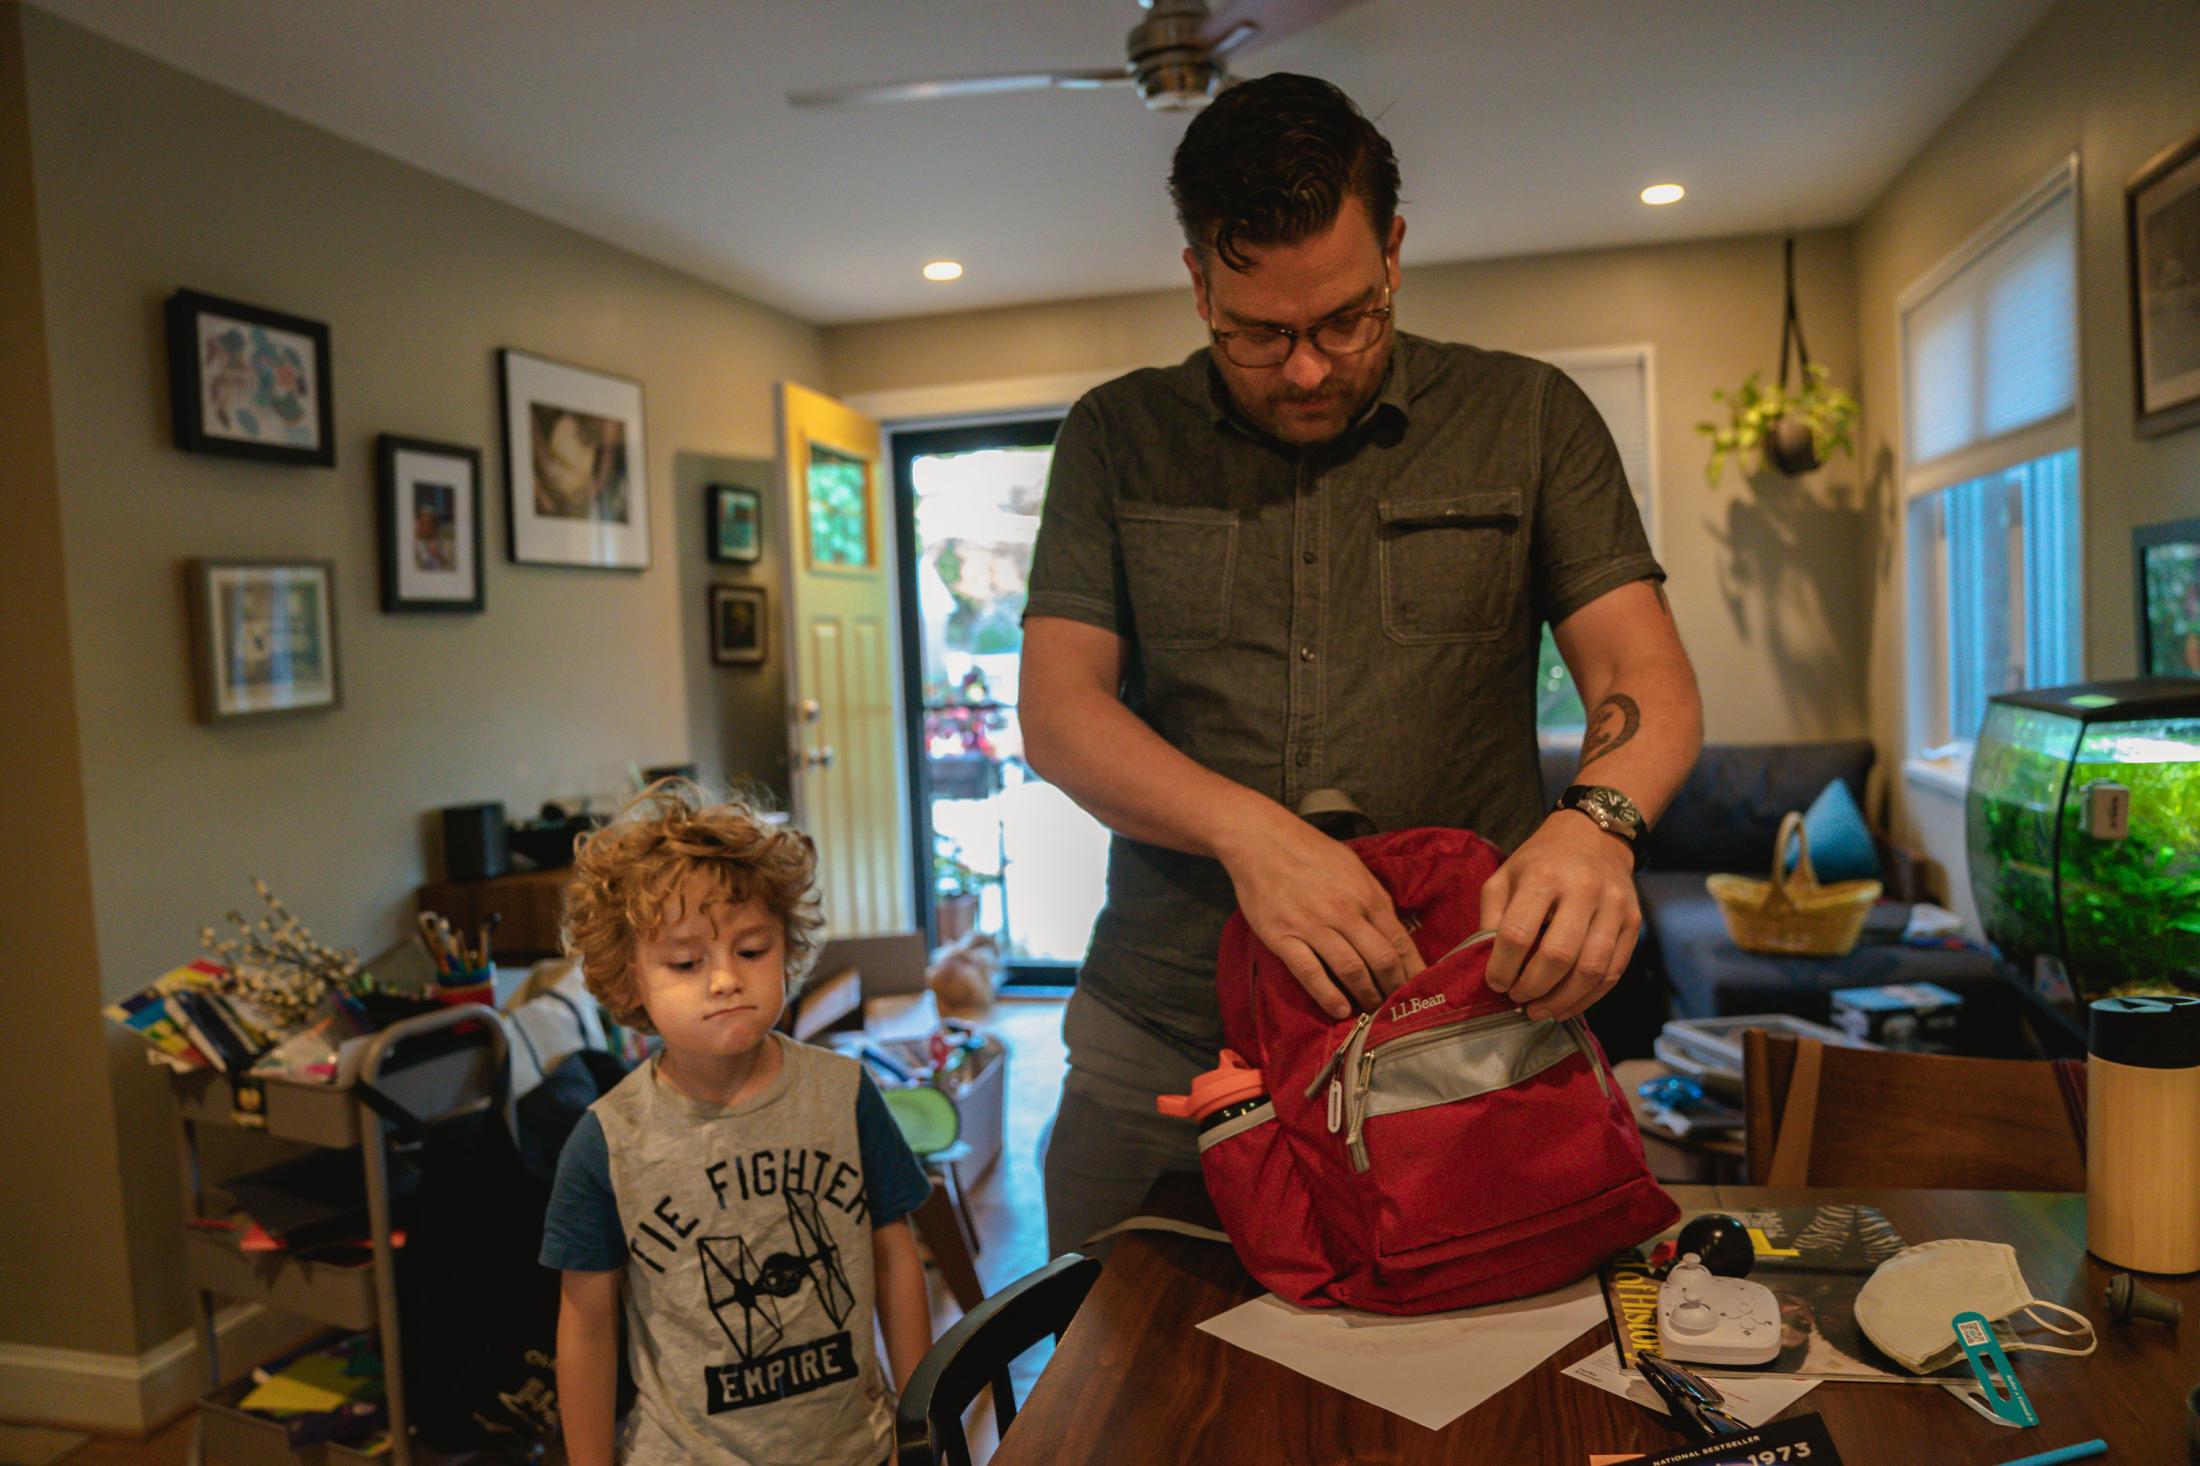 Peter helps Oscar prepare for his backpack in his house in Arlington, VA on Friday, September 15, 2021.